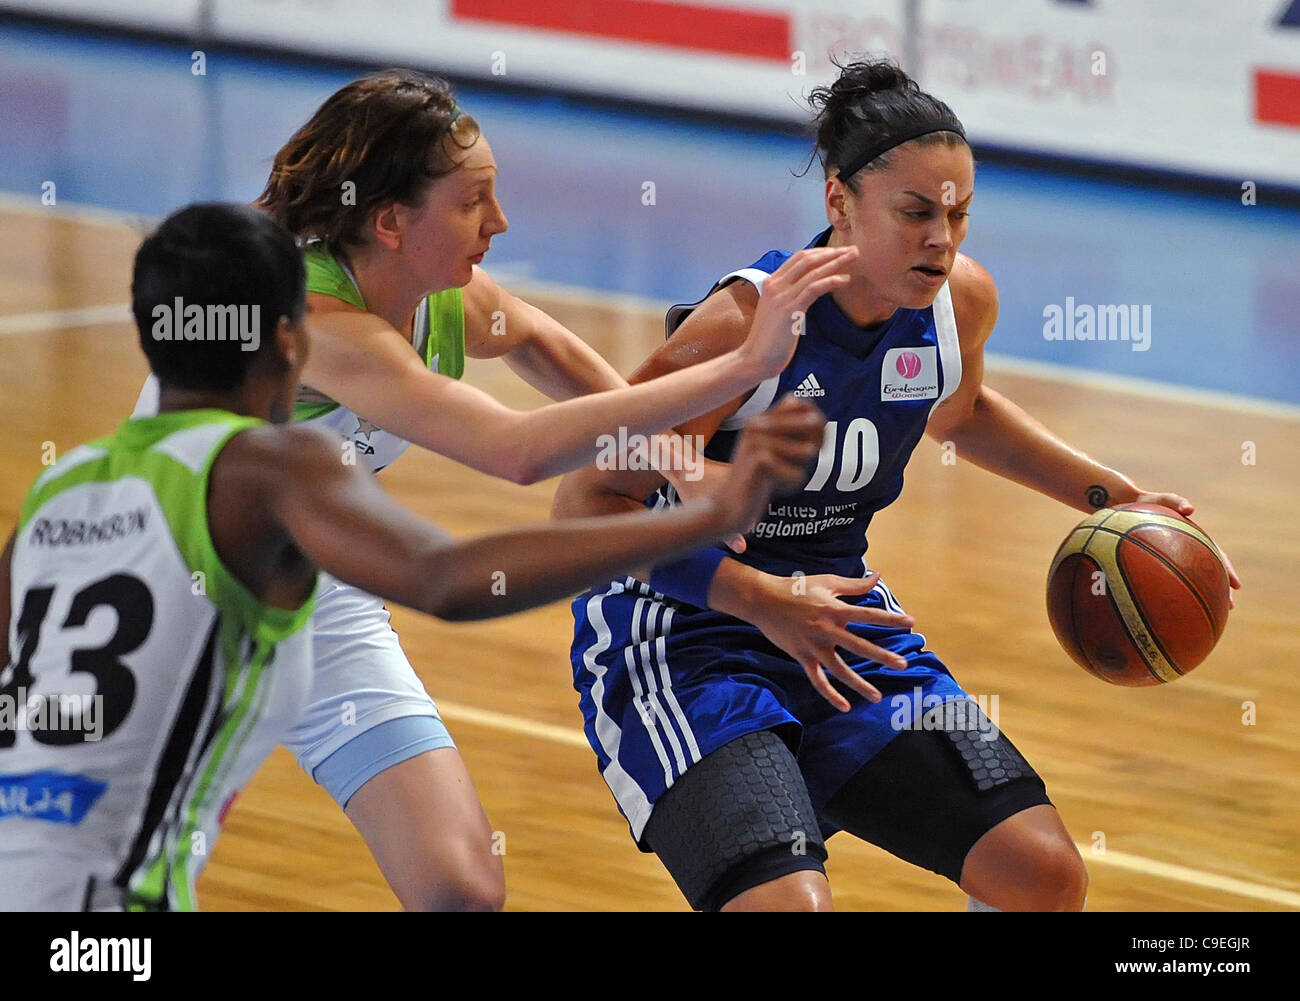 Basketball Euroleague Women, Group C, Frisco Sika Brno vs Montpellier, in Brno, Czech Republic, on Wednesday, December 7, 2011. From left to right Ashley Robinson and Tereza Peckova of Brno, and Kristen Mann of Montpellier. (CTK Photo/Igor Sefr) Stock Photo